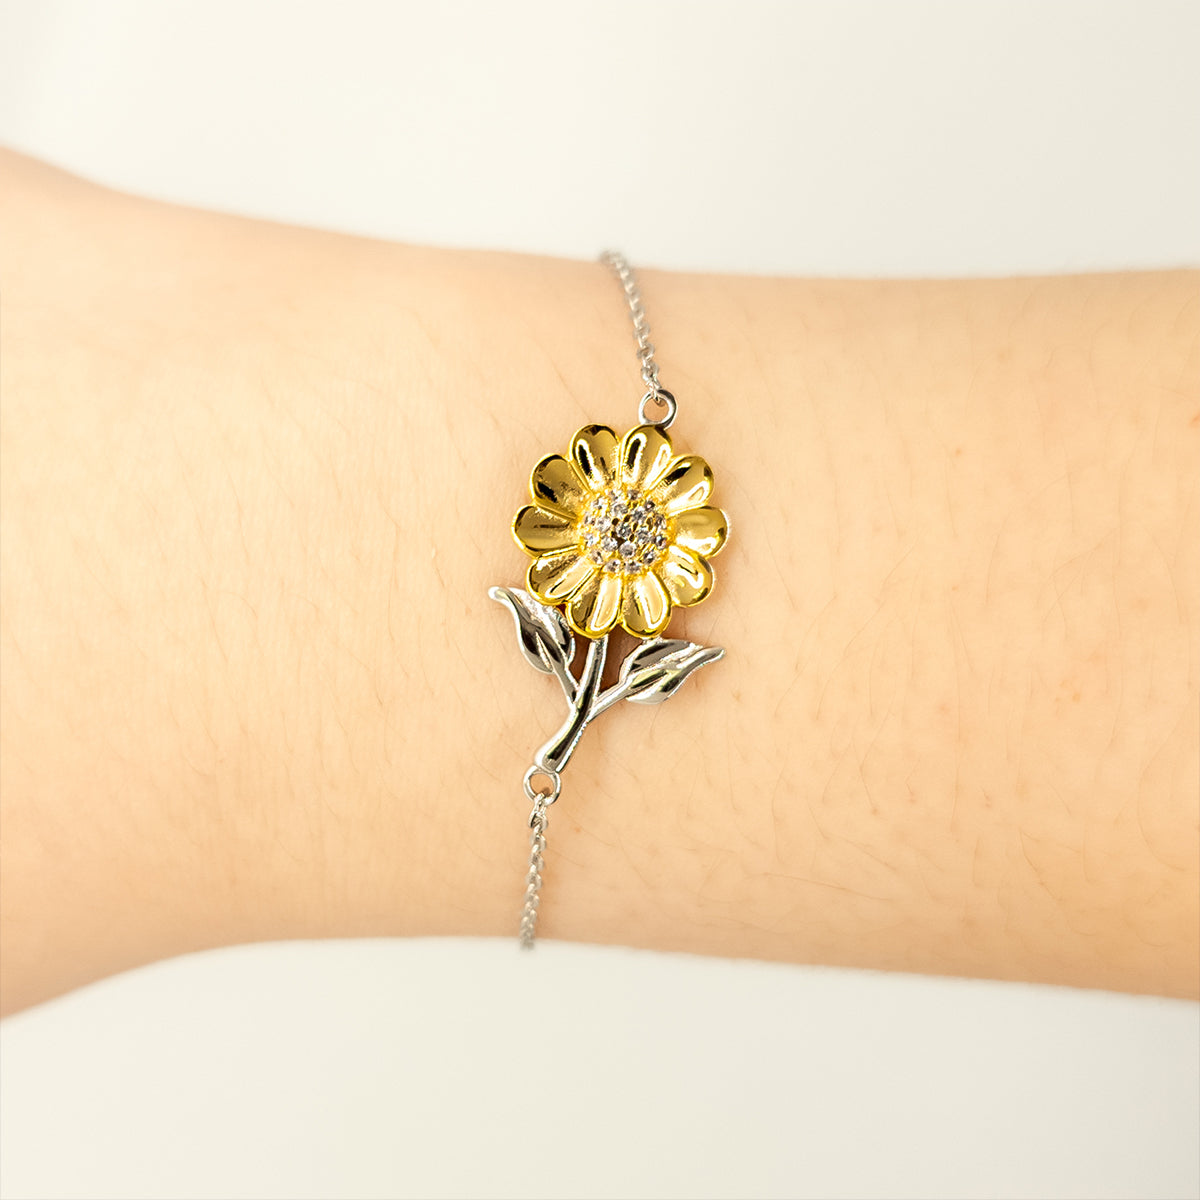 Grandmum Sunflower Bracelet - Engraved with You will always have a special place in my heart - Meaningful Gift for Grandma on Christmas, Birthday, or Mothers Day - Unique Floral Charm Jewelry for Senior Women